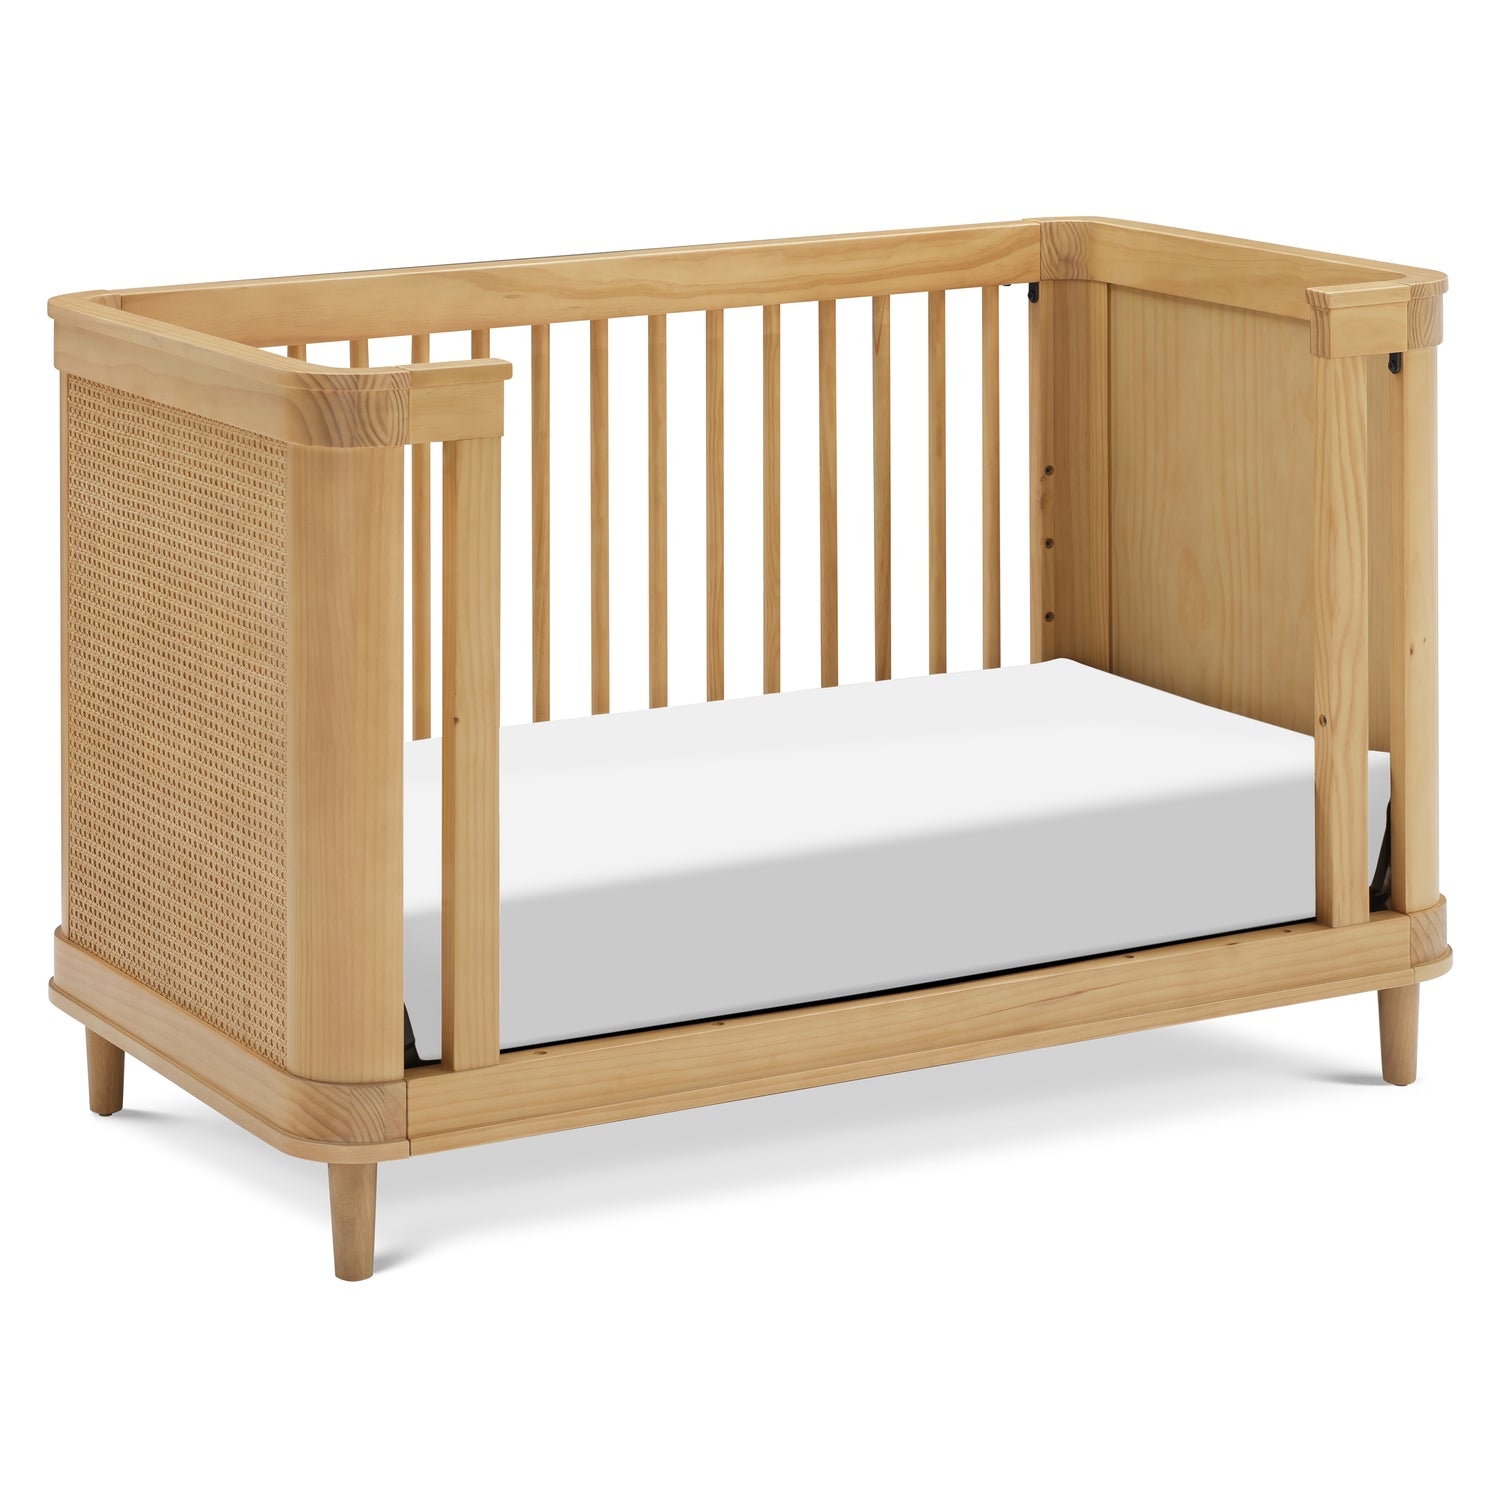 Daybed, M23701HYHC,Marin with Cane 3-in-1 Convertible Crib in Honey and Honey Cane